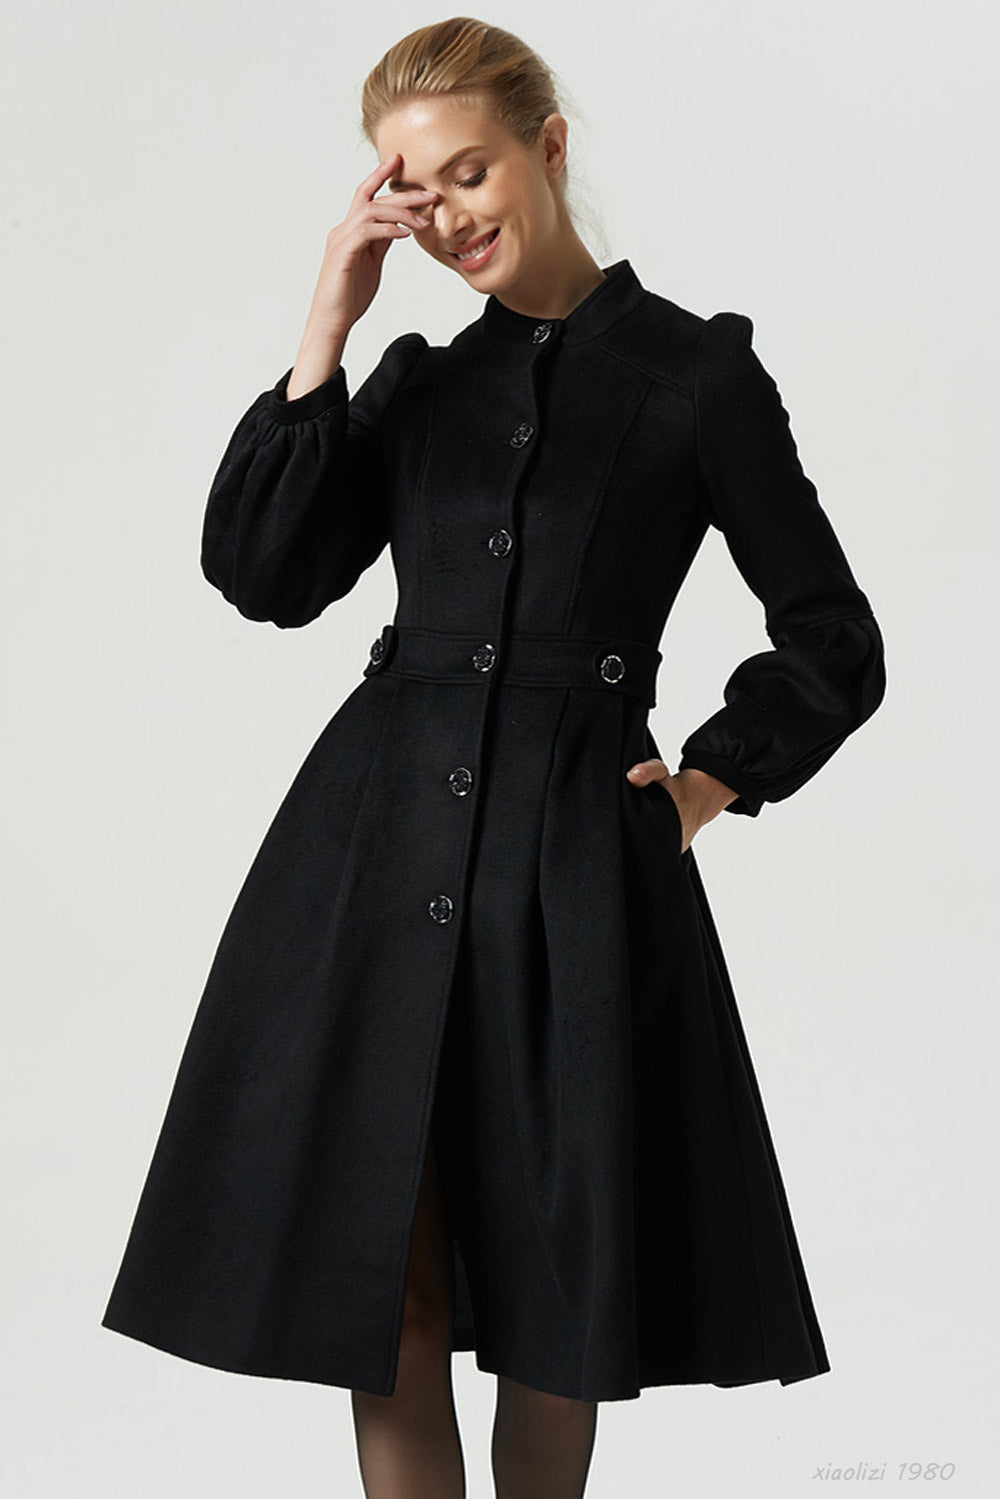 womens black fit and flare dress coat 1980#